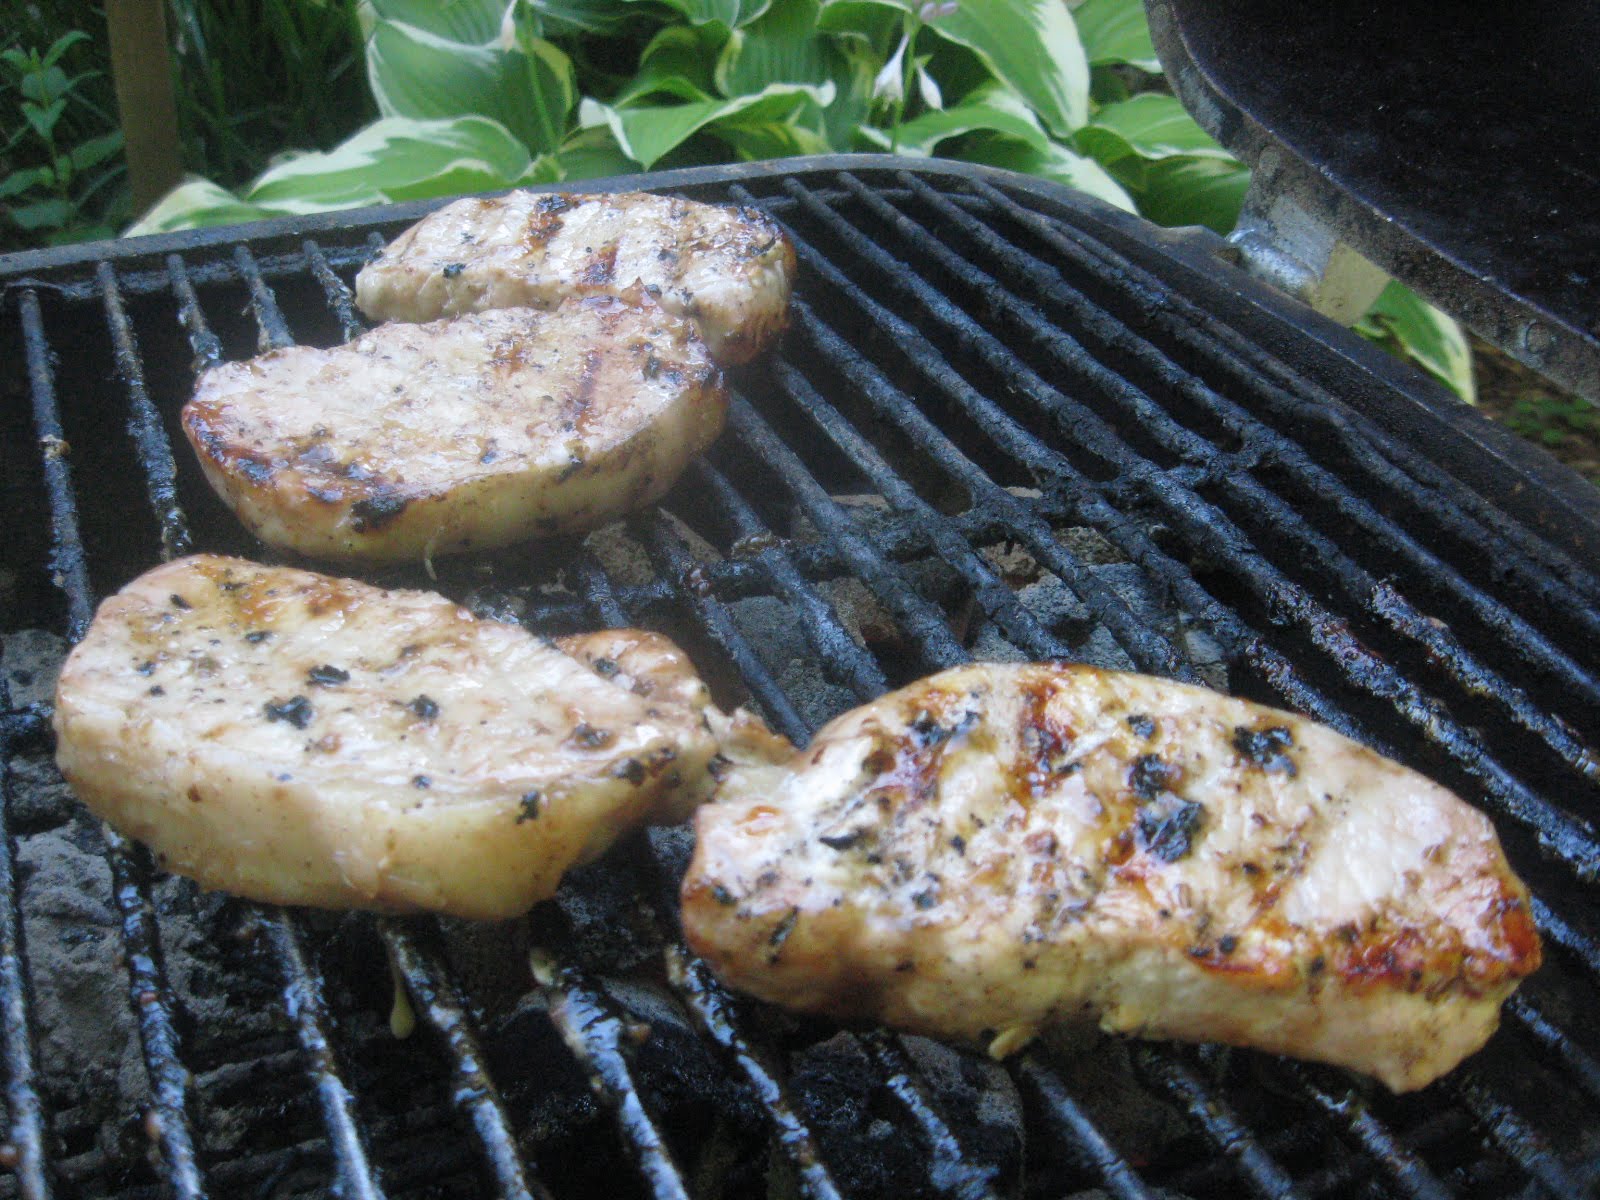 How Many Calories Are In Pork Chops Grilled On The Grill